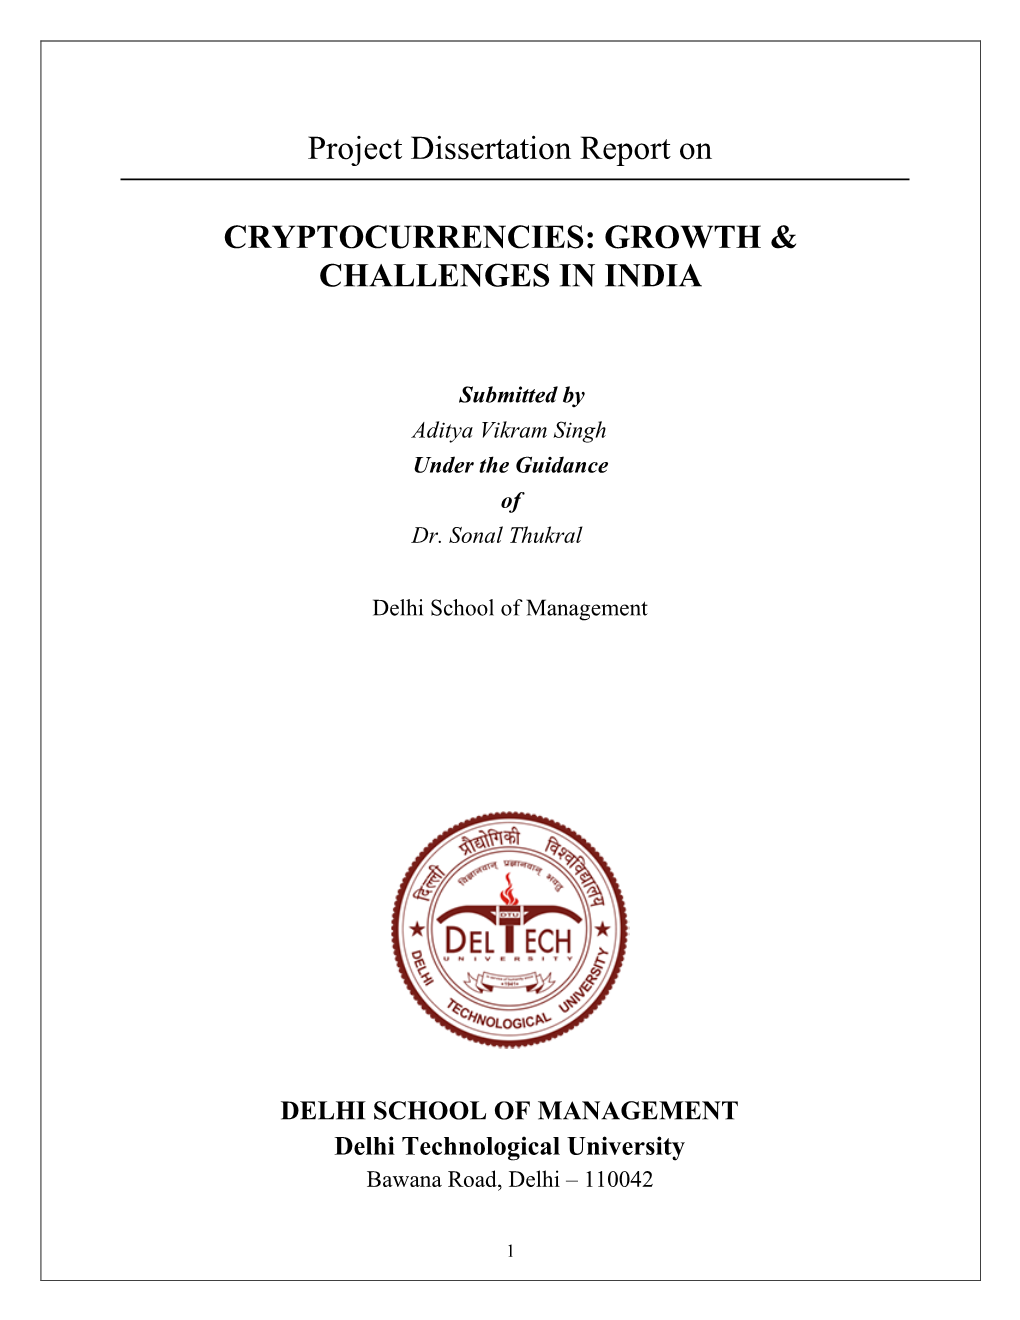 Project Dissertation Report on CRYPTOCURRENCIES: GROWTH